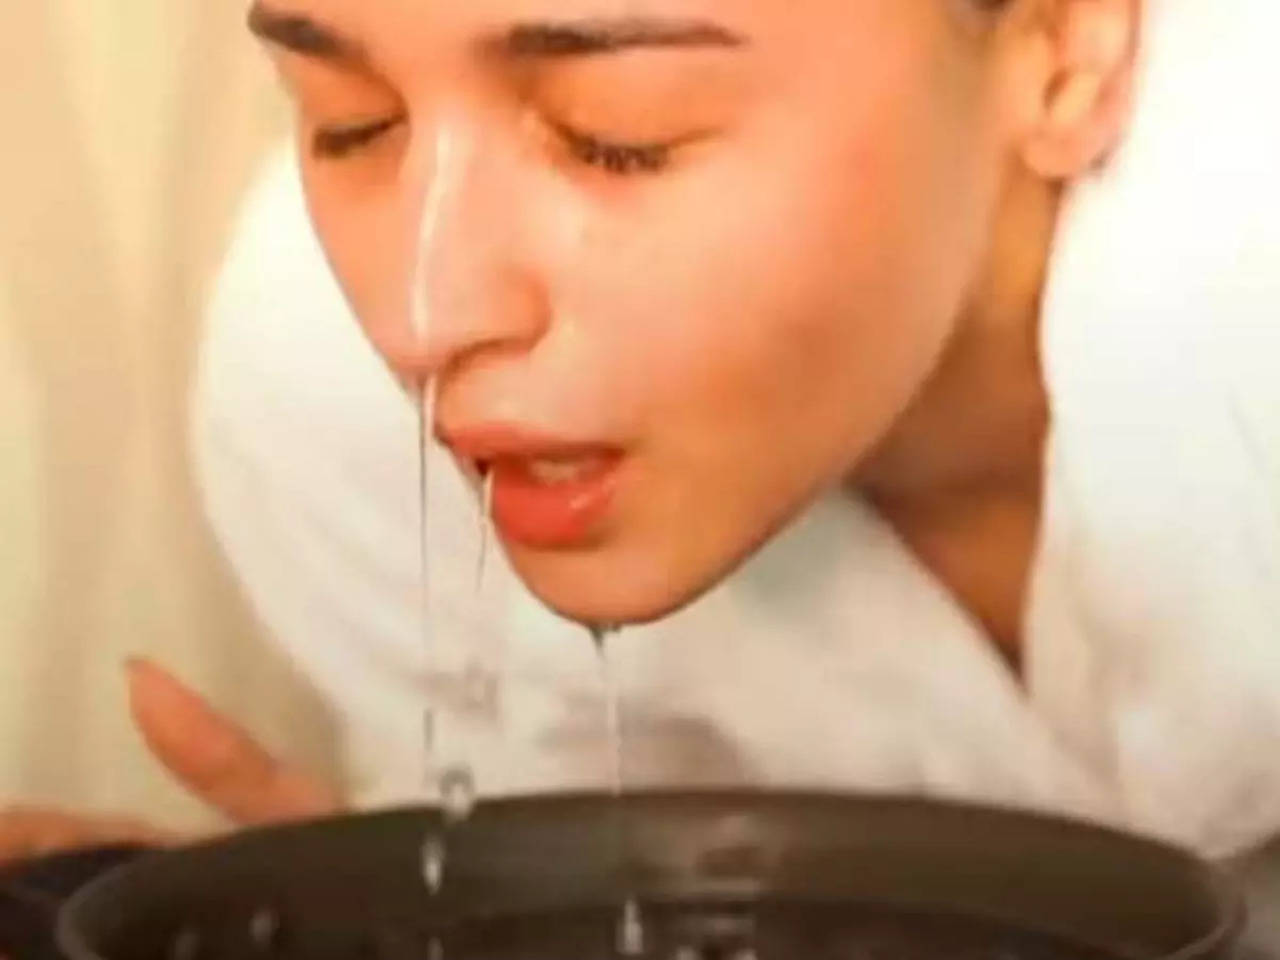 Does Korean beauty hack of soaking face in ice water really work? picture